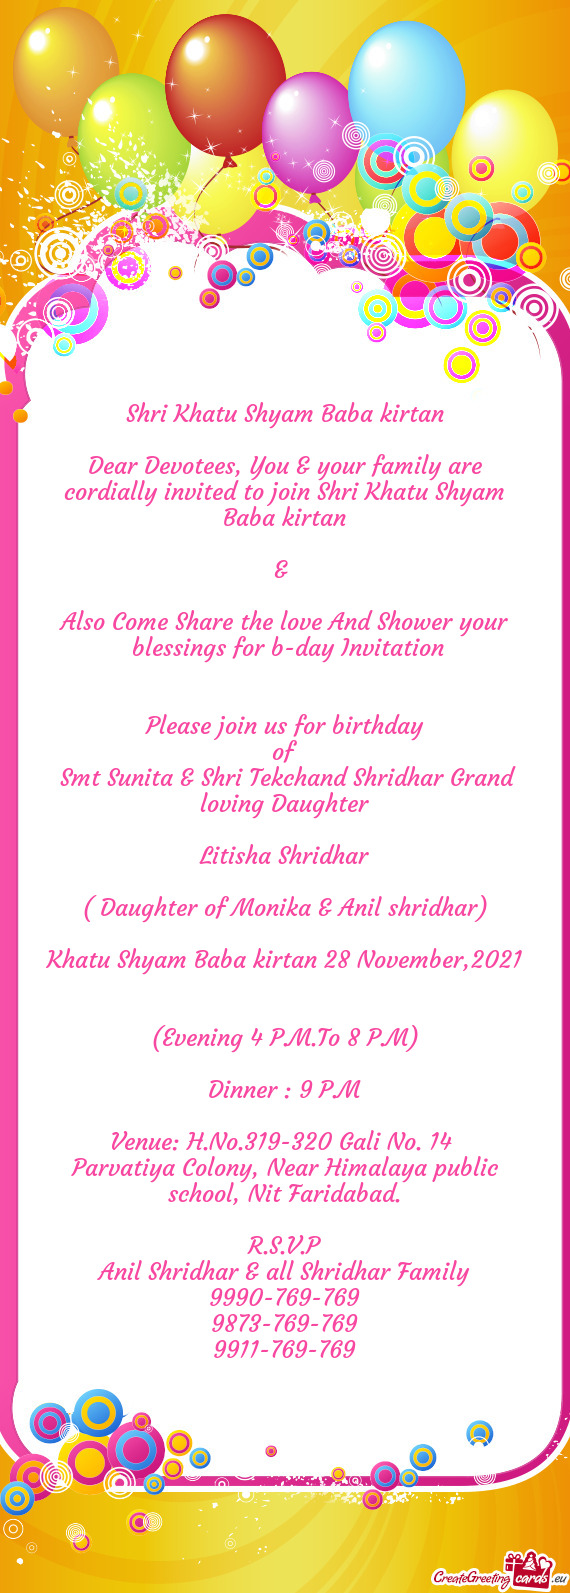 Blessings for b-day Invitation